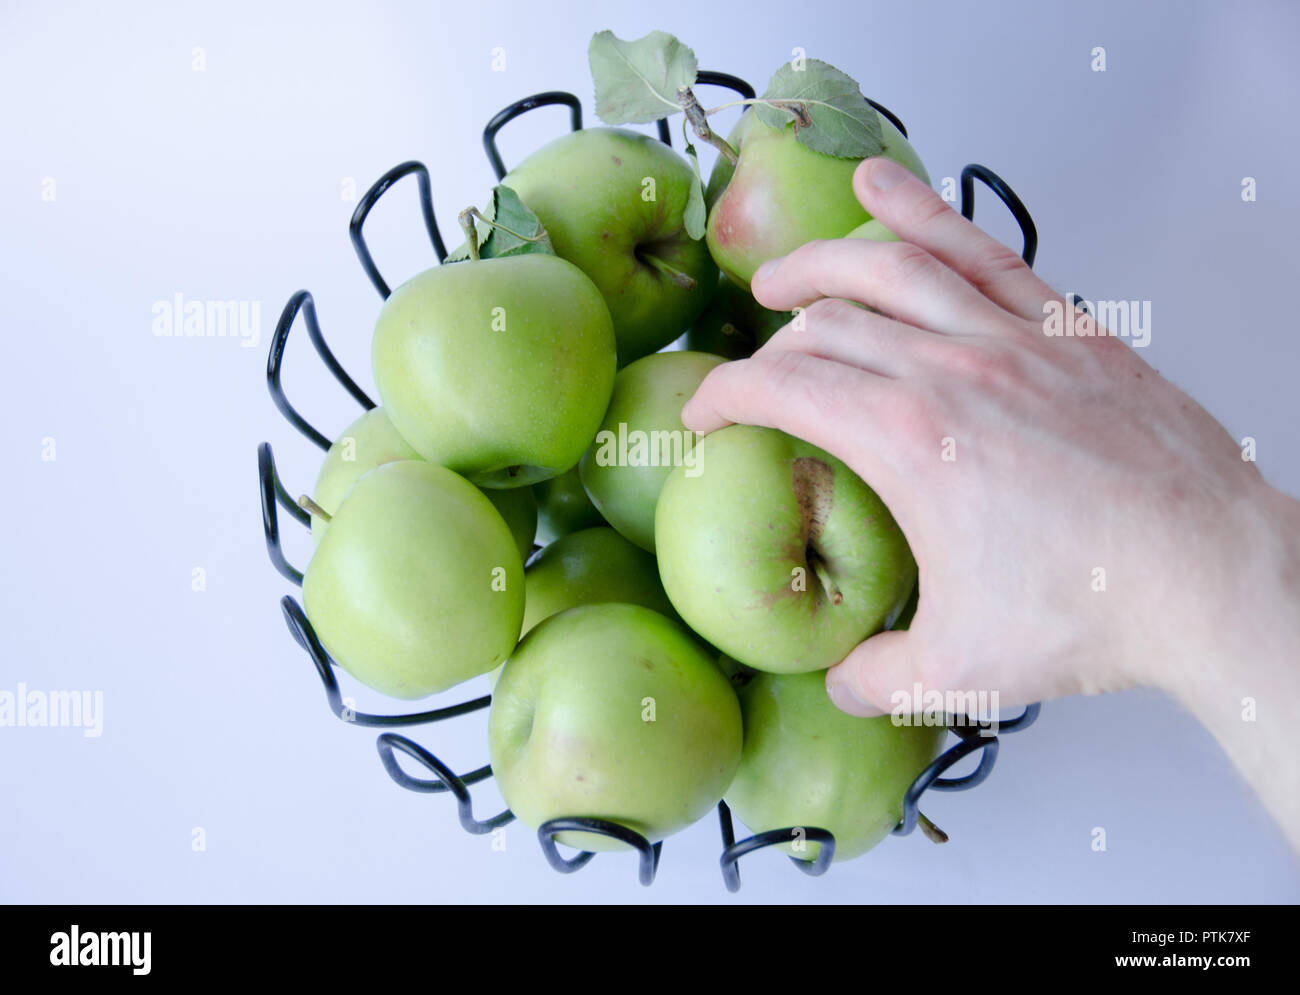 Group of green apple with leaves on white background Stock Photo